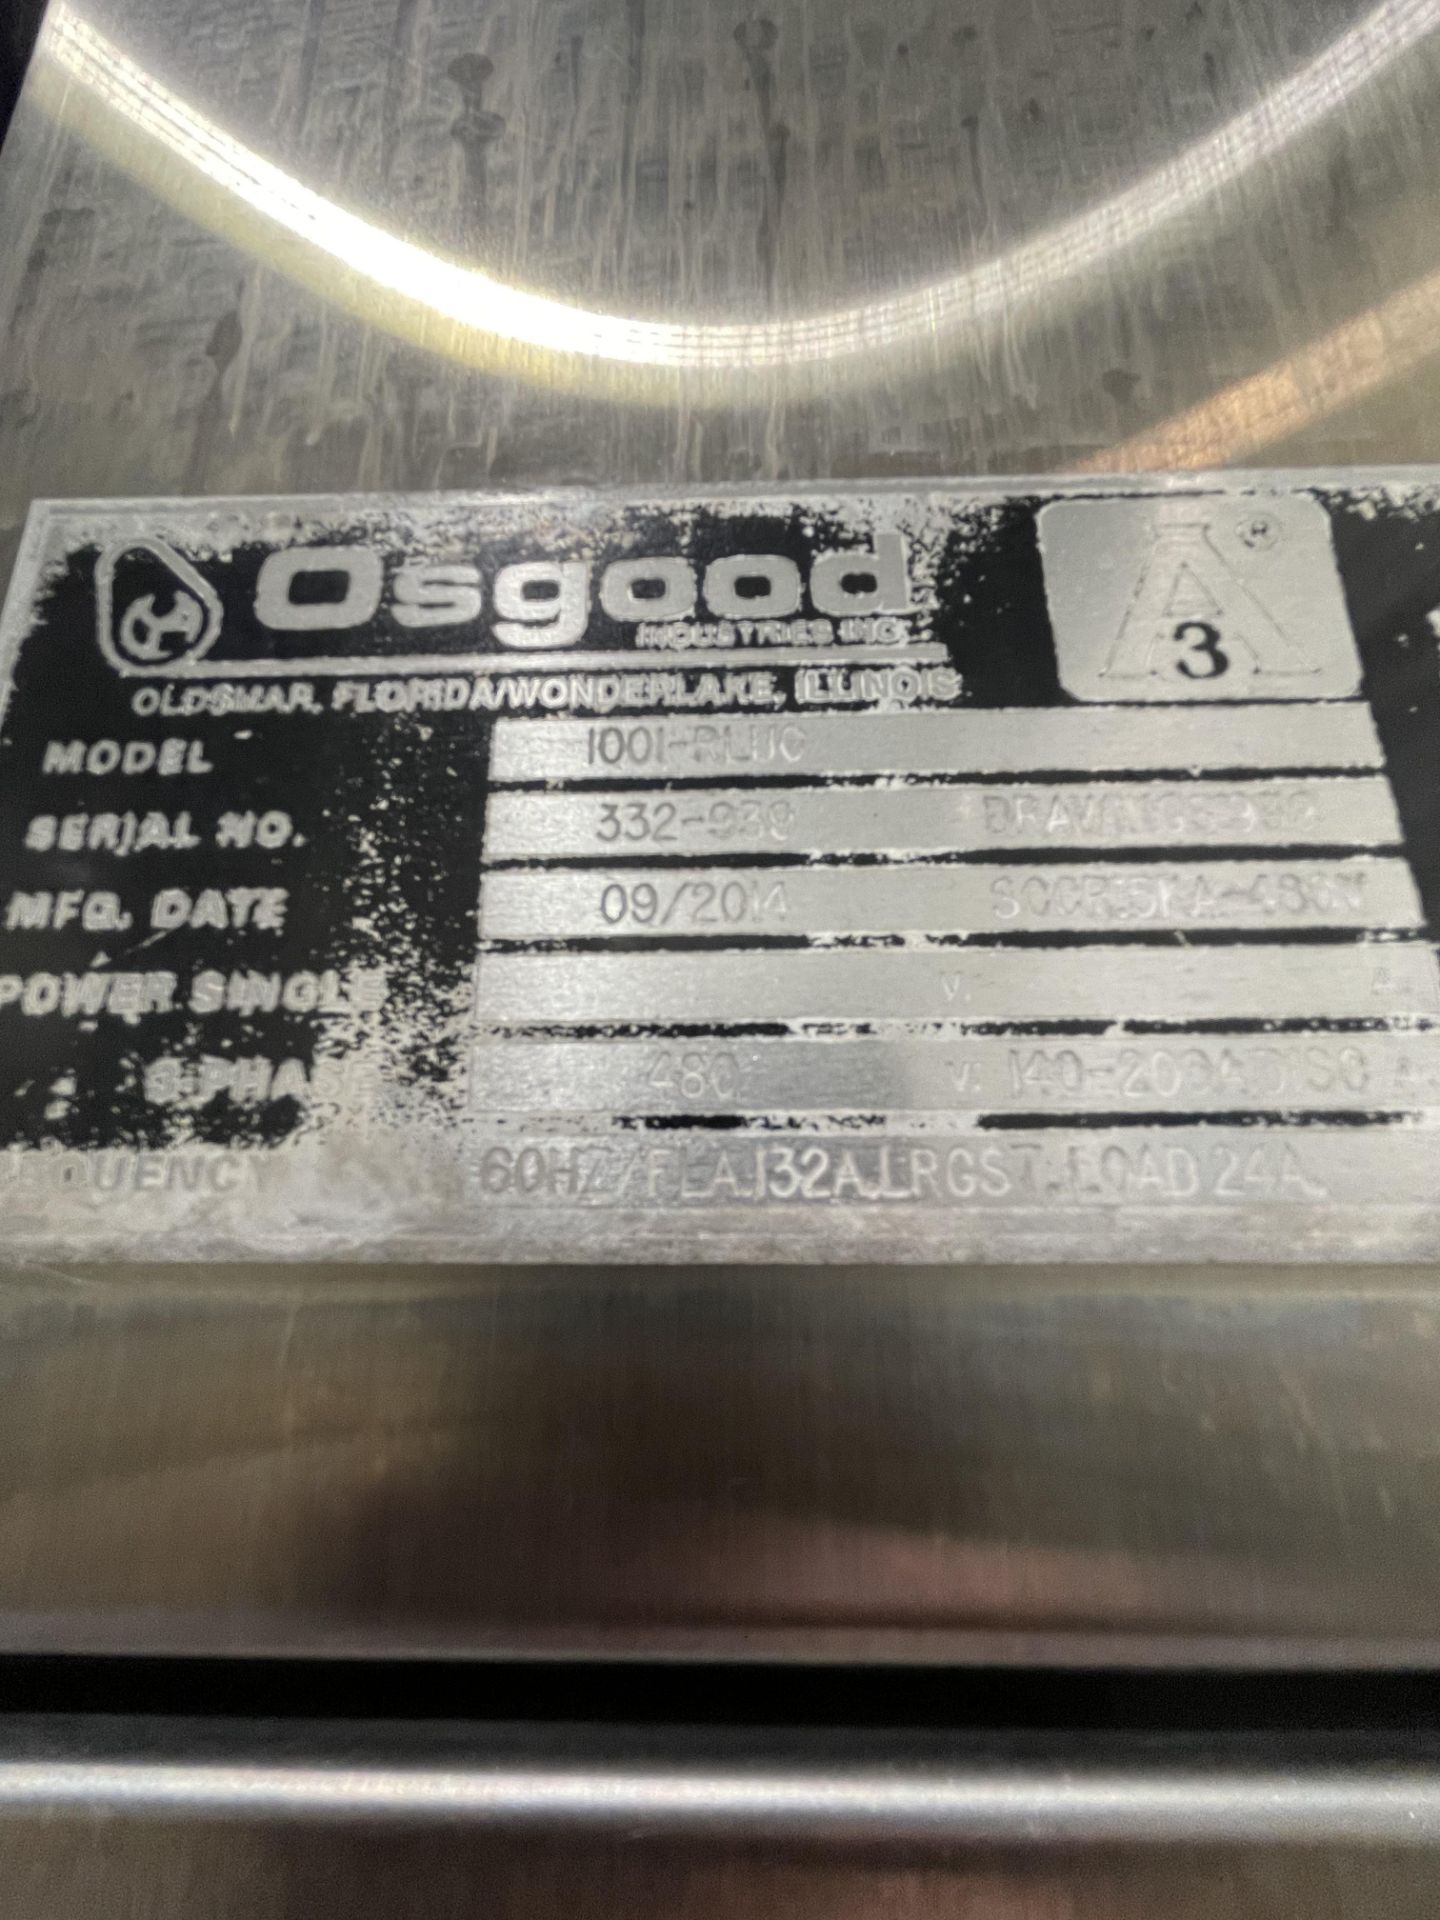 2014 OSGOOD ULTRA CLEAN ROTARY FILLER, MODEL 1001-R, S/N 332-9395 LB @ 30 CPM AND 10 LB @ 15 CPM, - Image 20 of 37